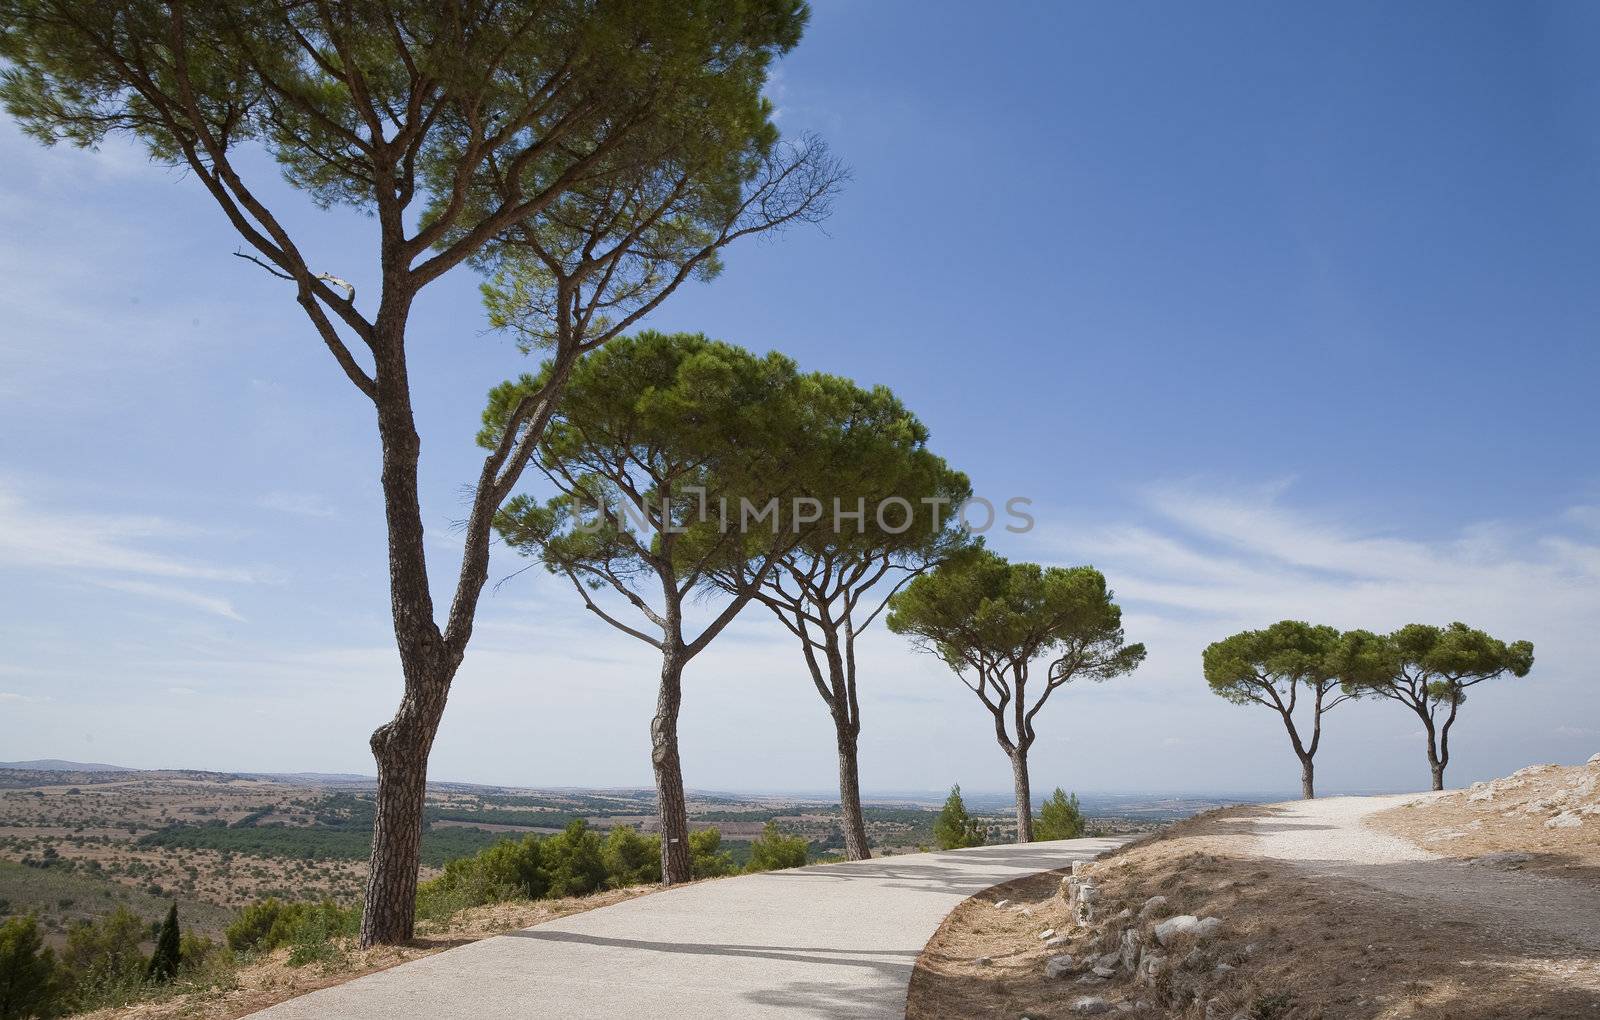 Beautiful landscape in Apulia, Italy with Pine trees along a footpath.